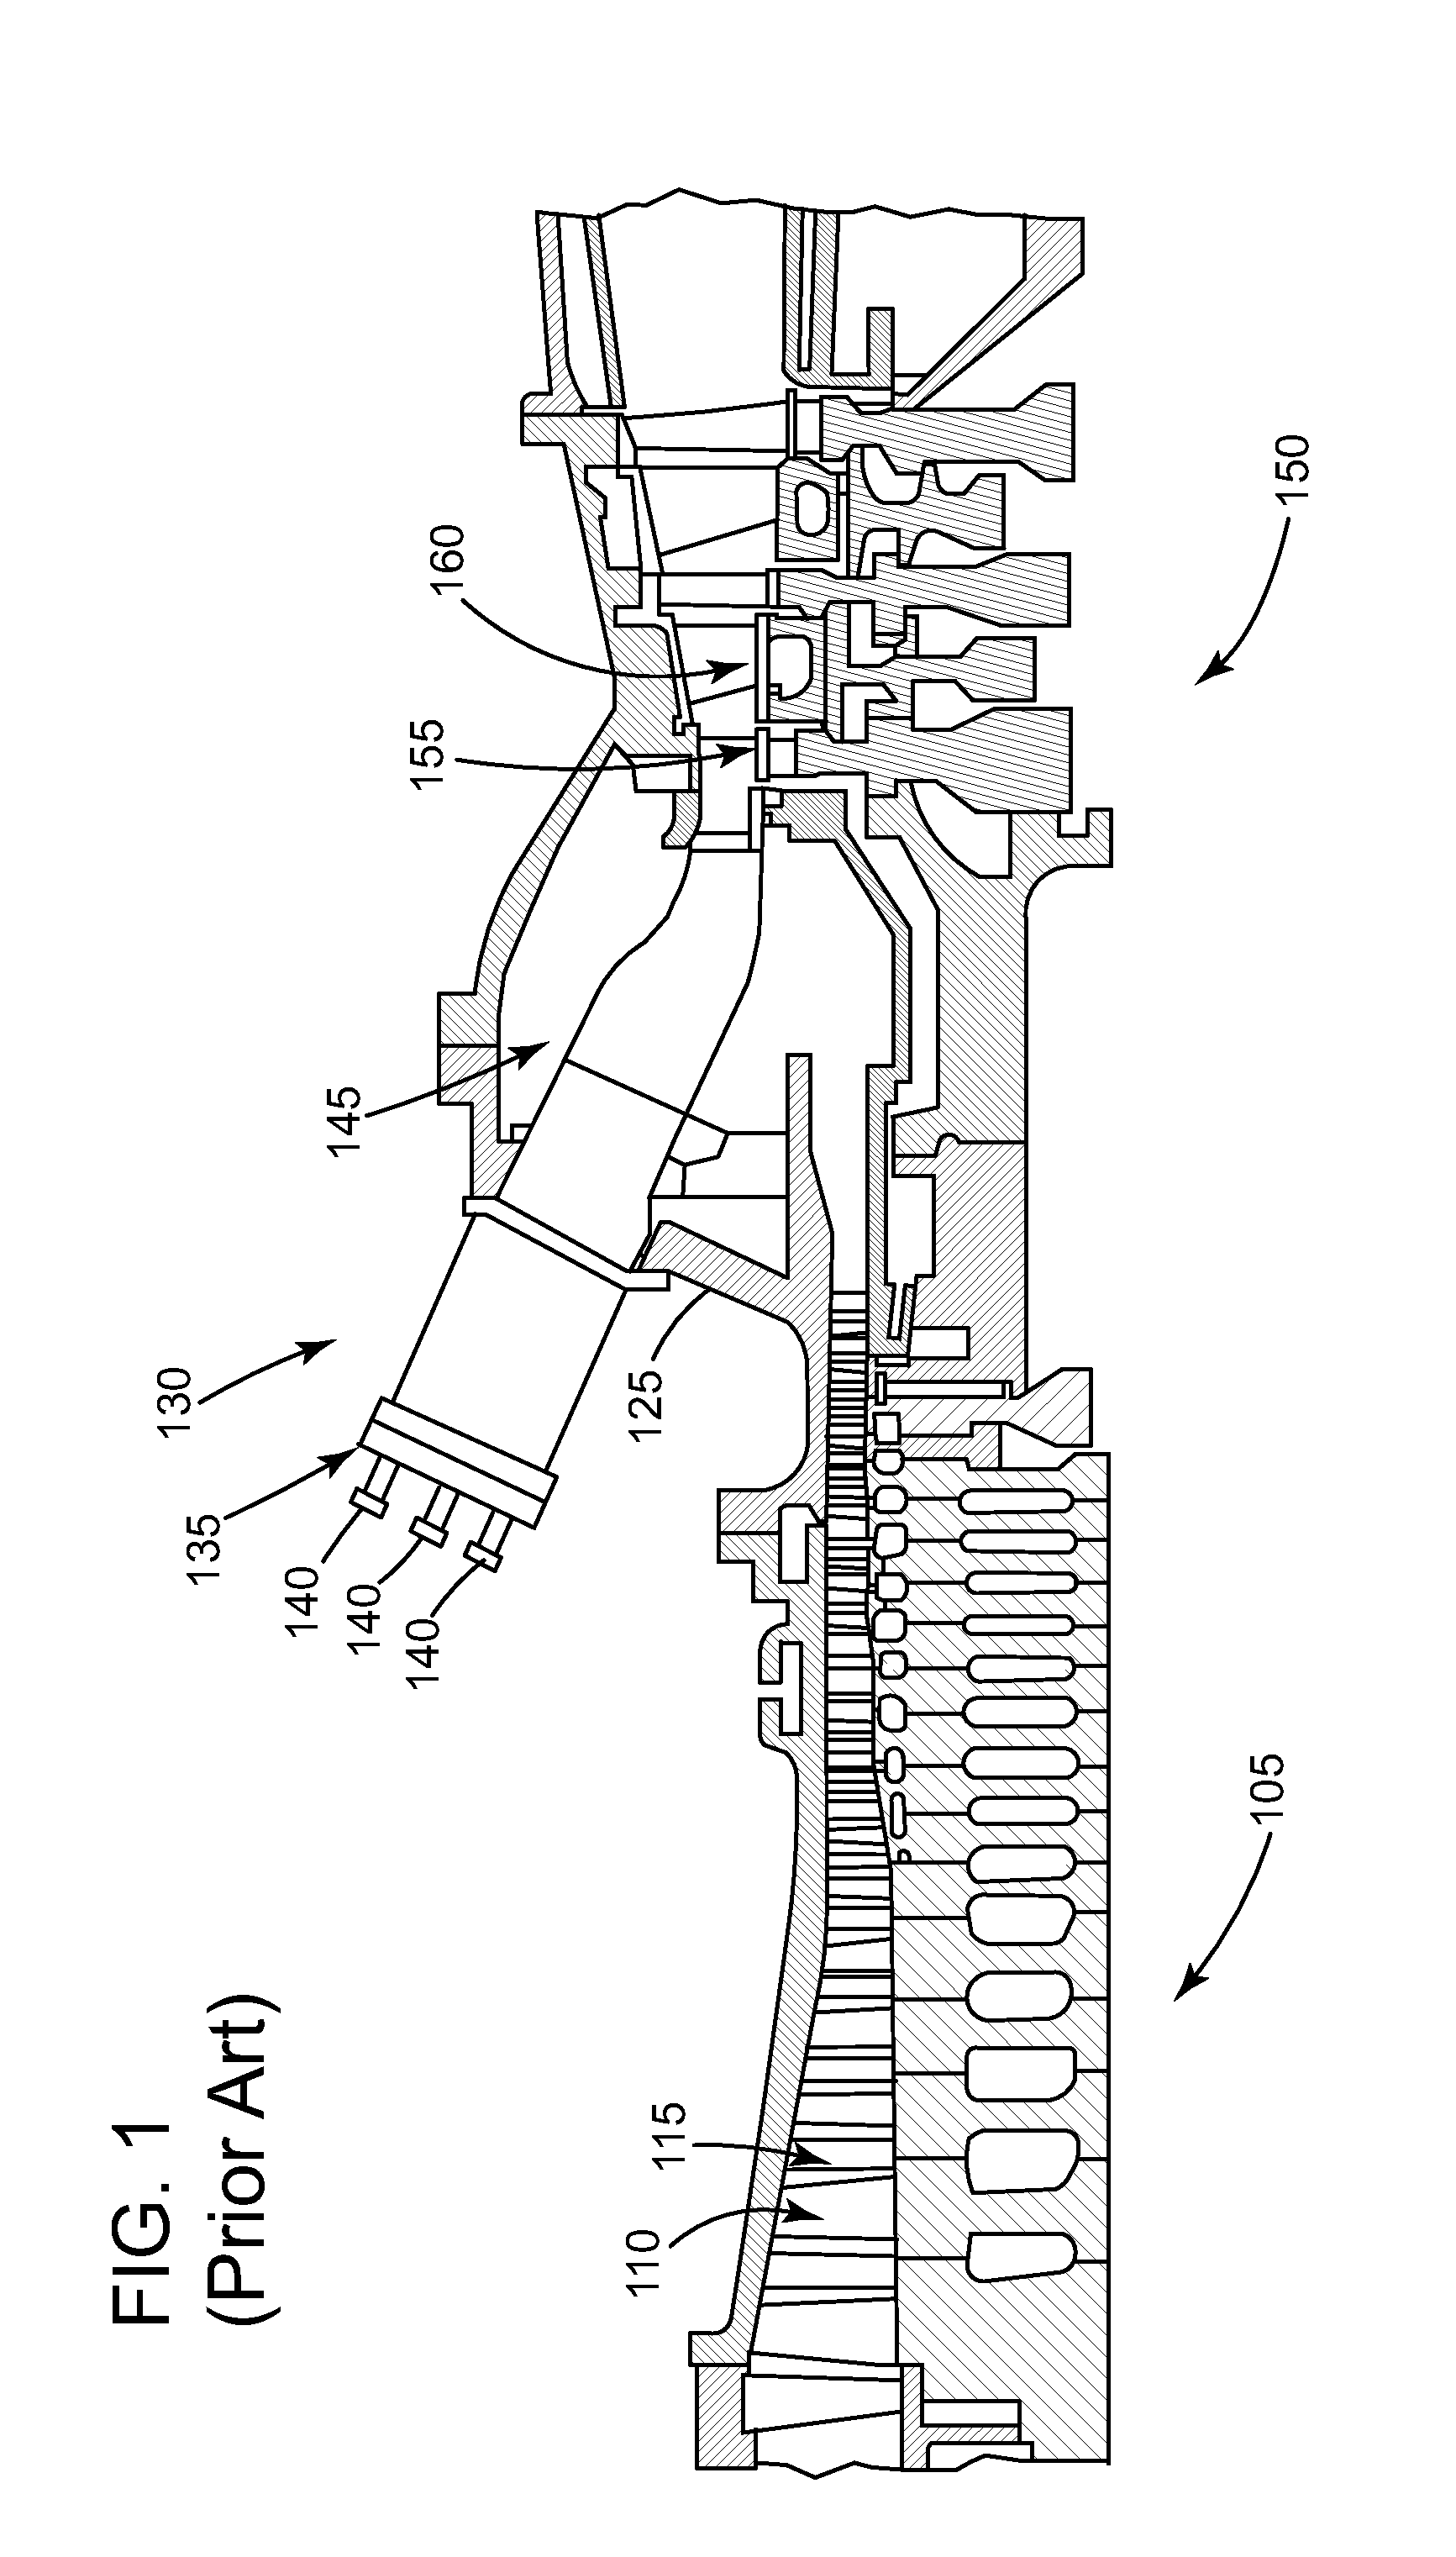 System for sealing a shaft